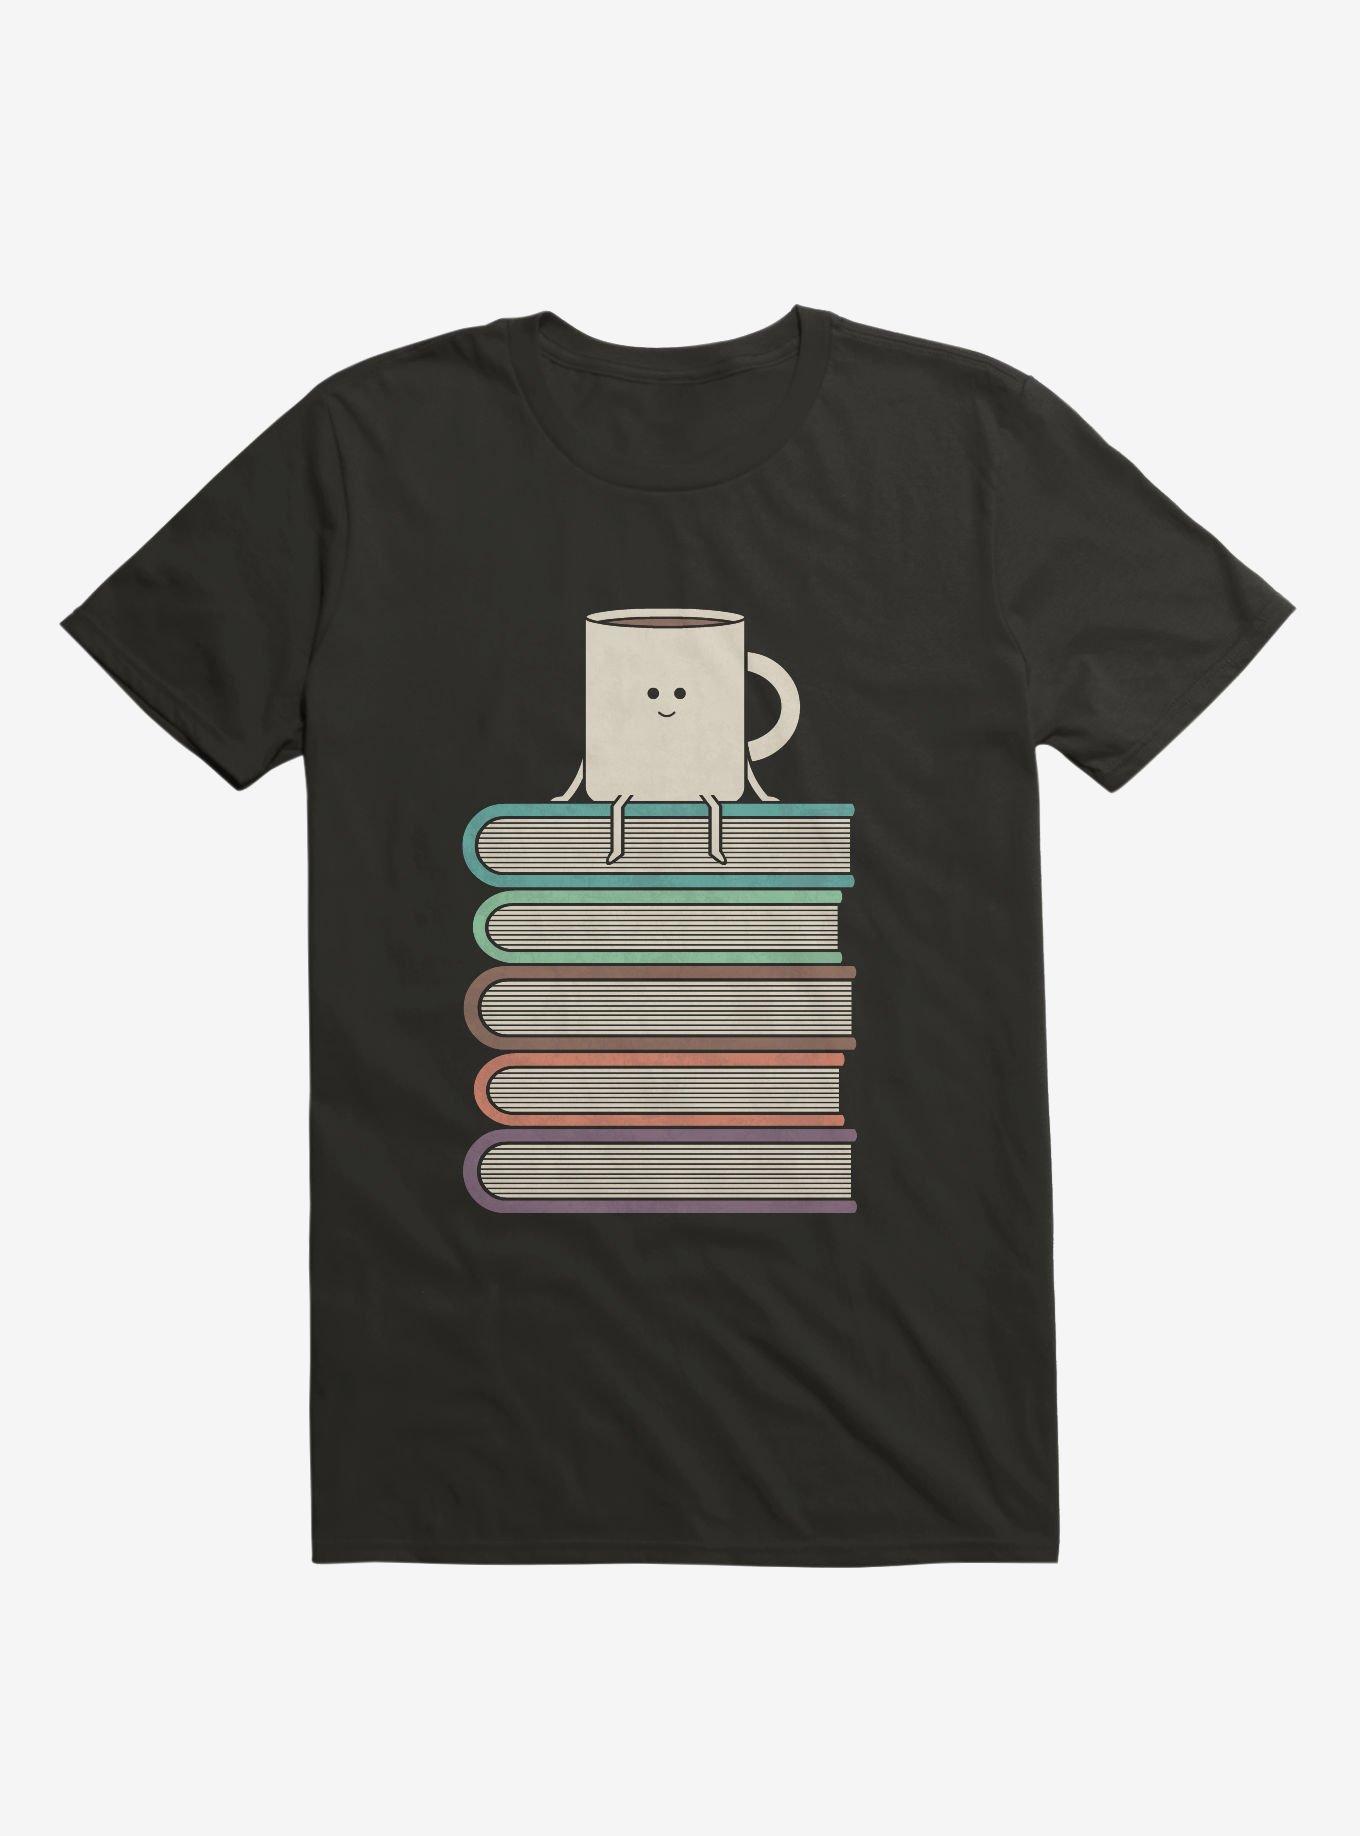 Top Of The World Cup On Books T-Shirt